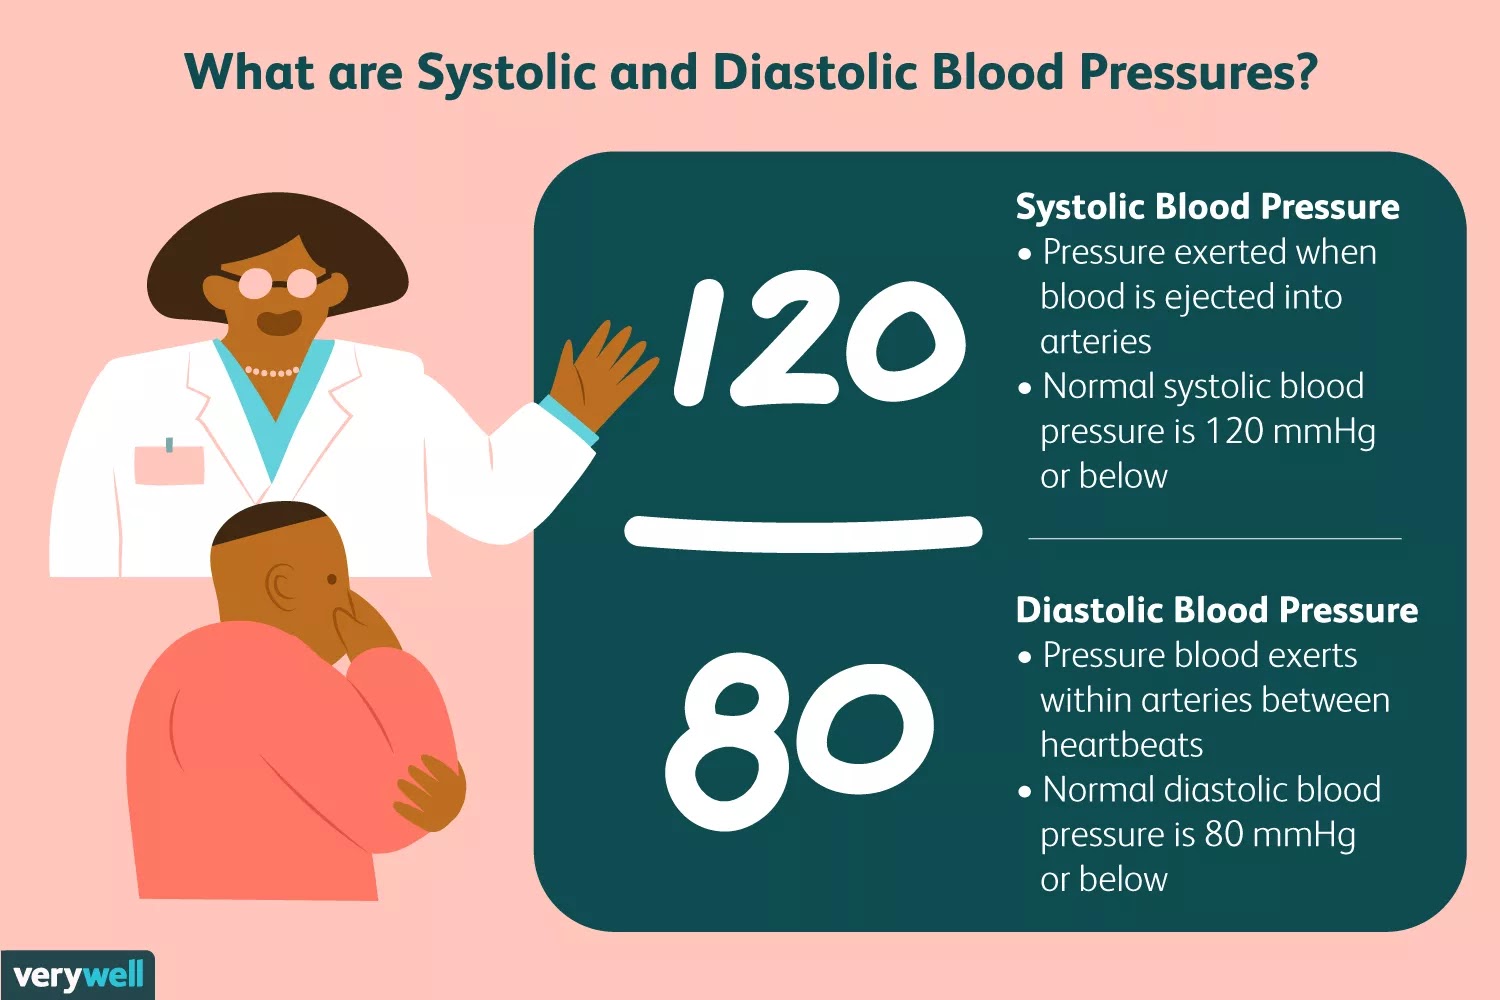 How to understand a blood pressure reading